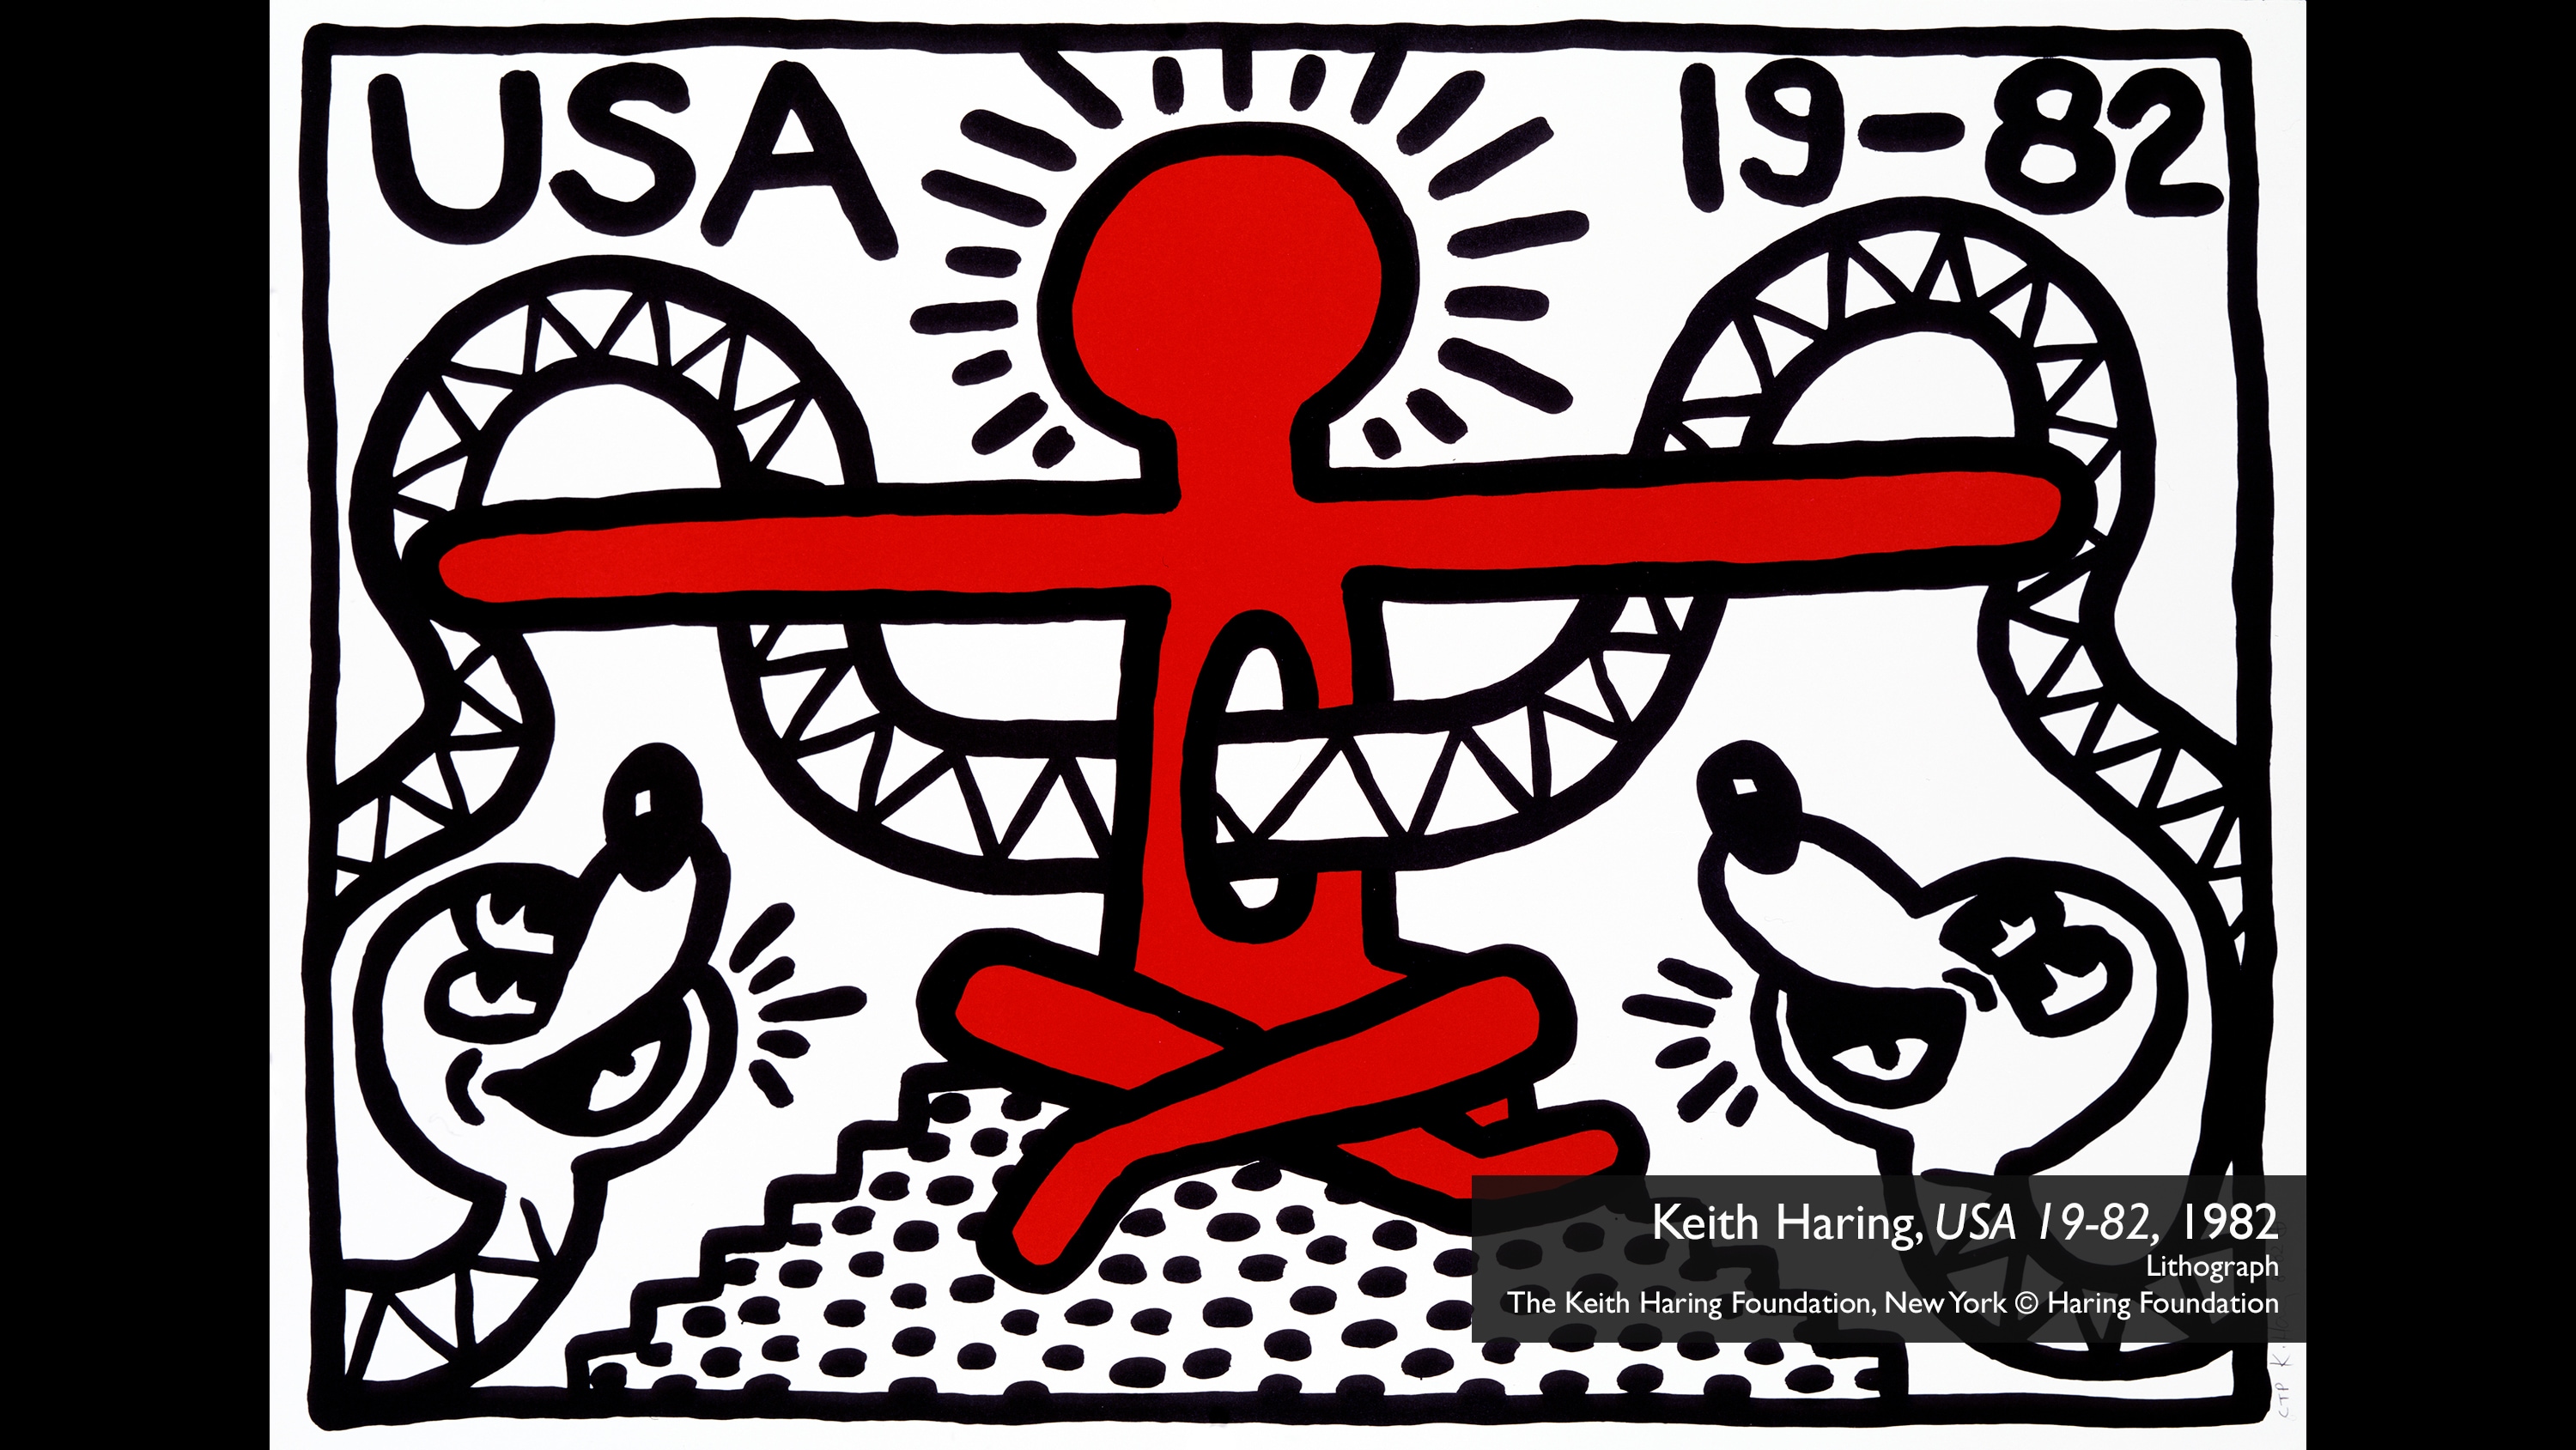 Keith Haring, USA 19-82, 1982. Lithograph The Keith Haring Foundation, New York © Haring Foundation